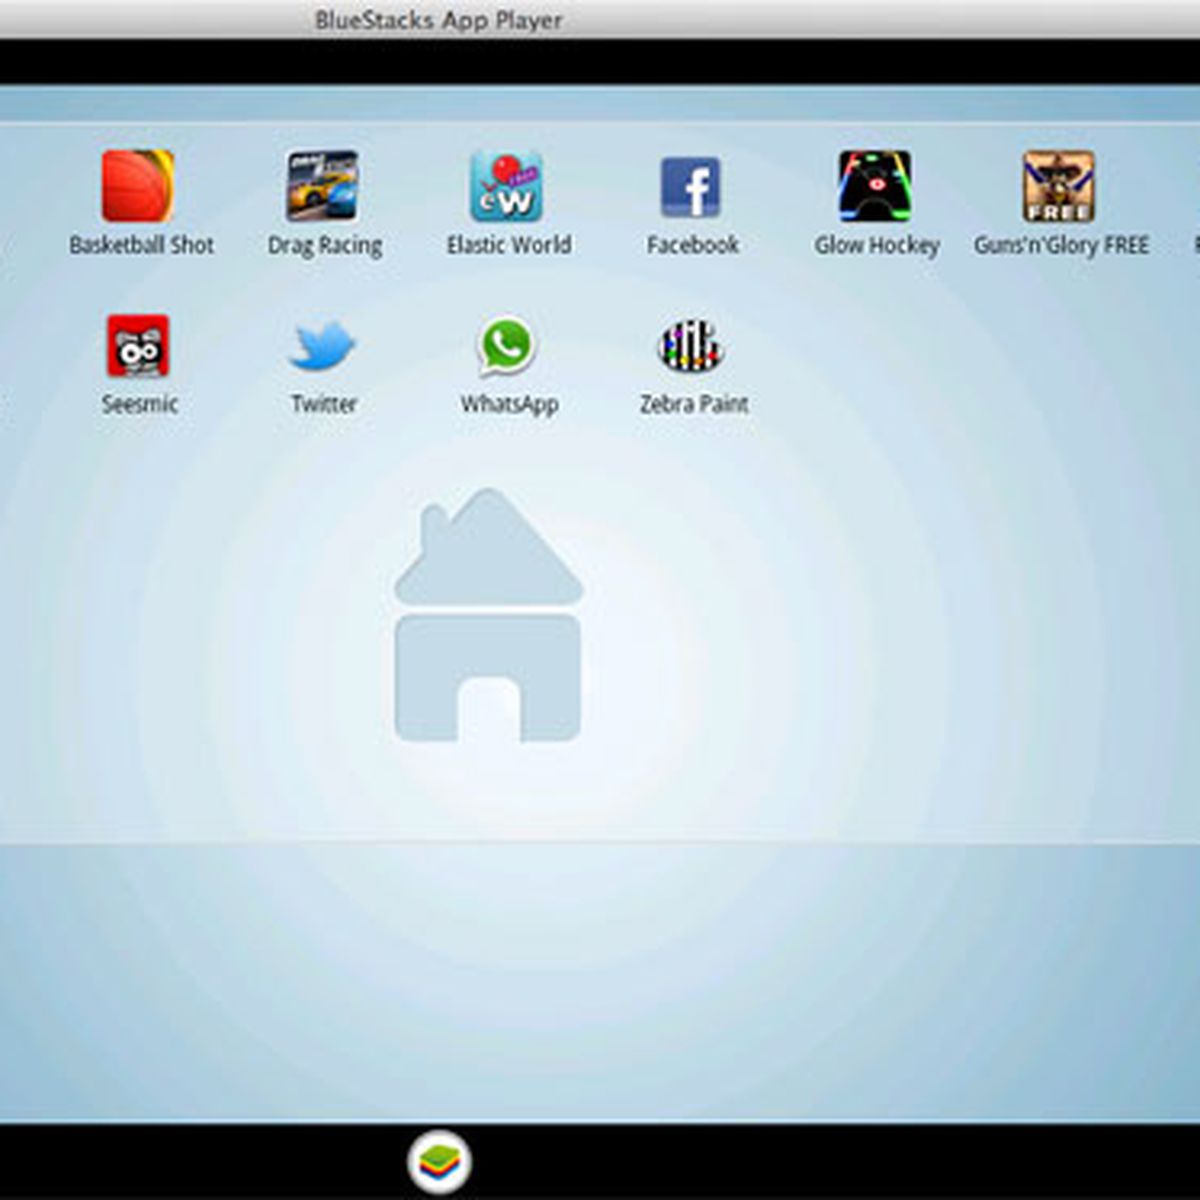 Run Android apps on Mac OS X with Bluestacks